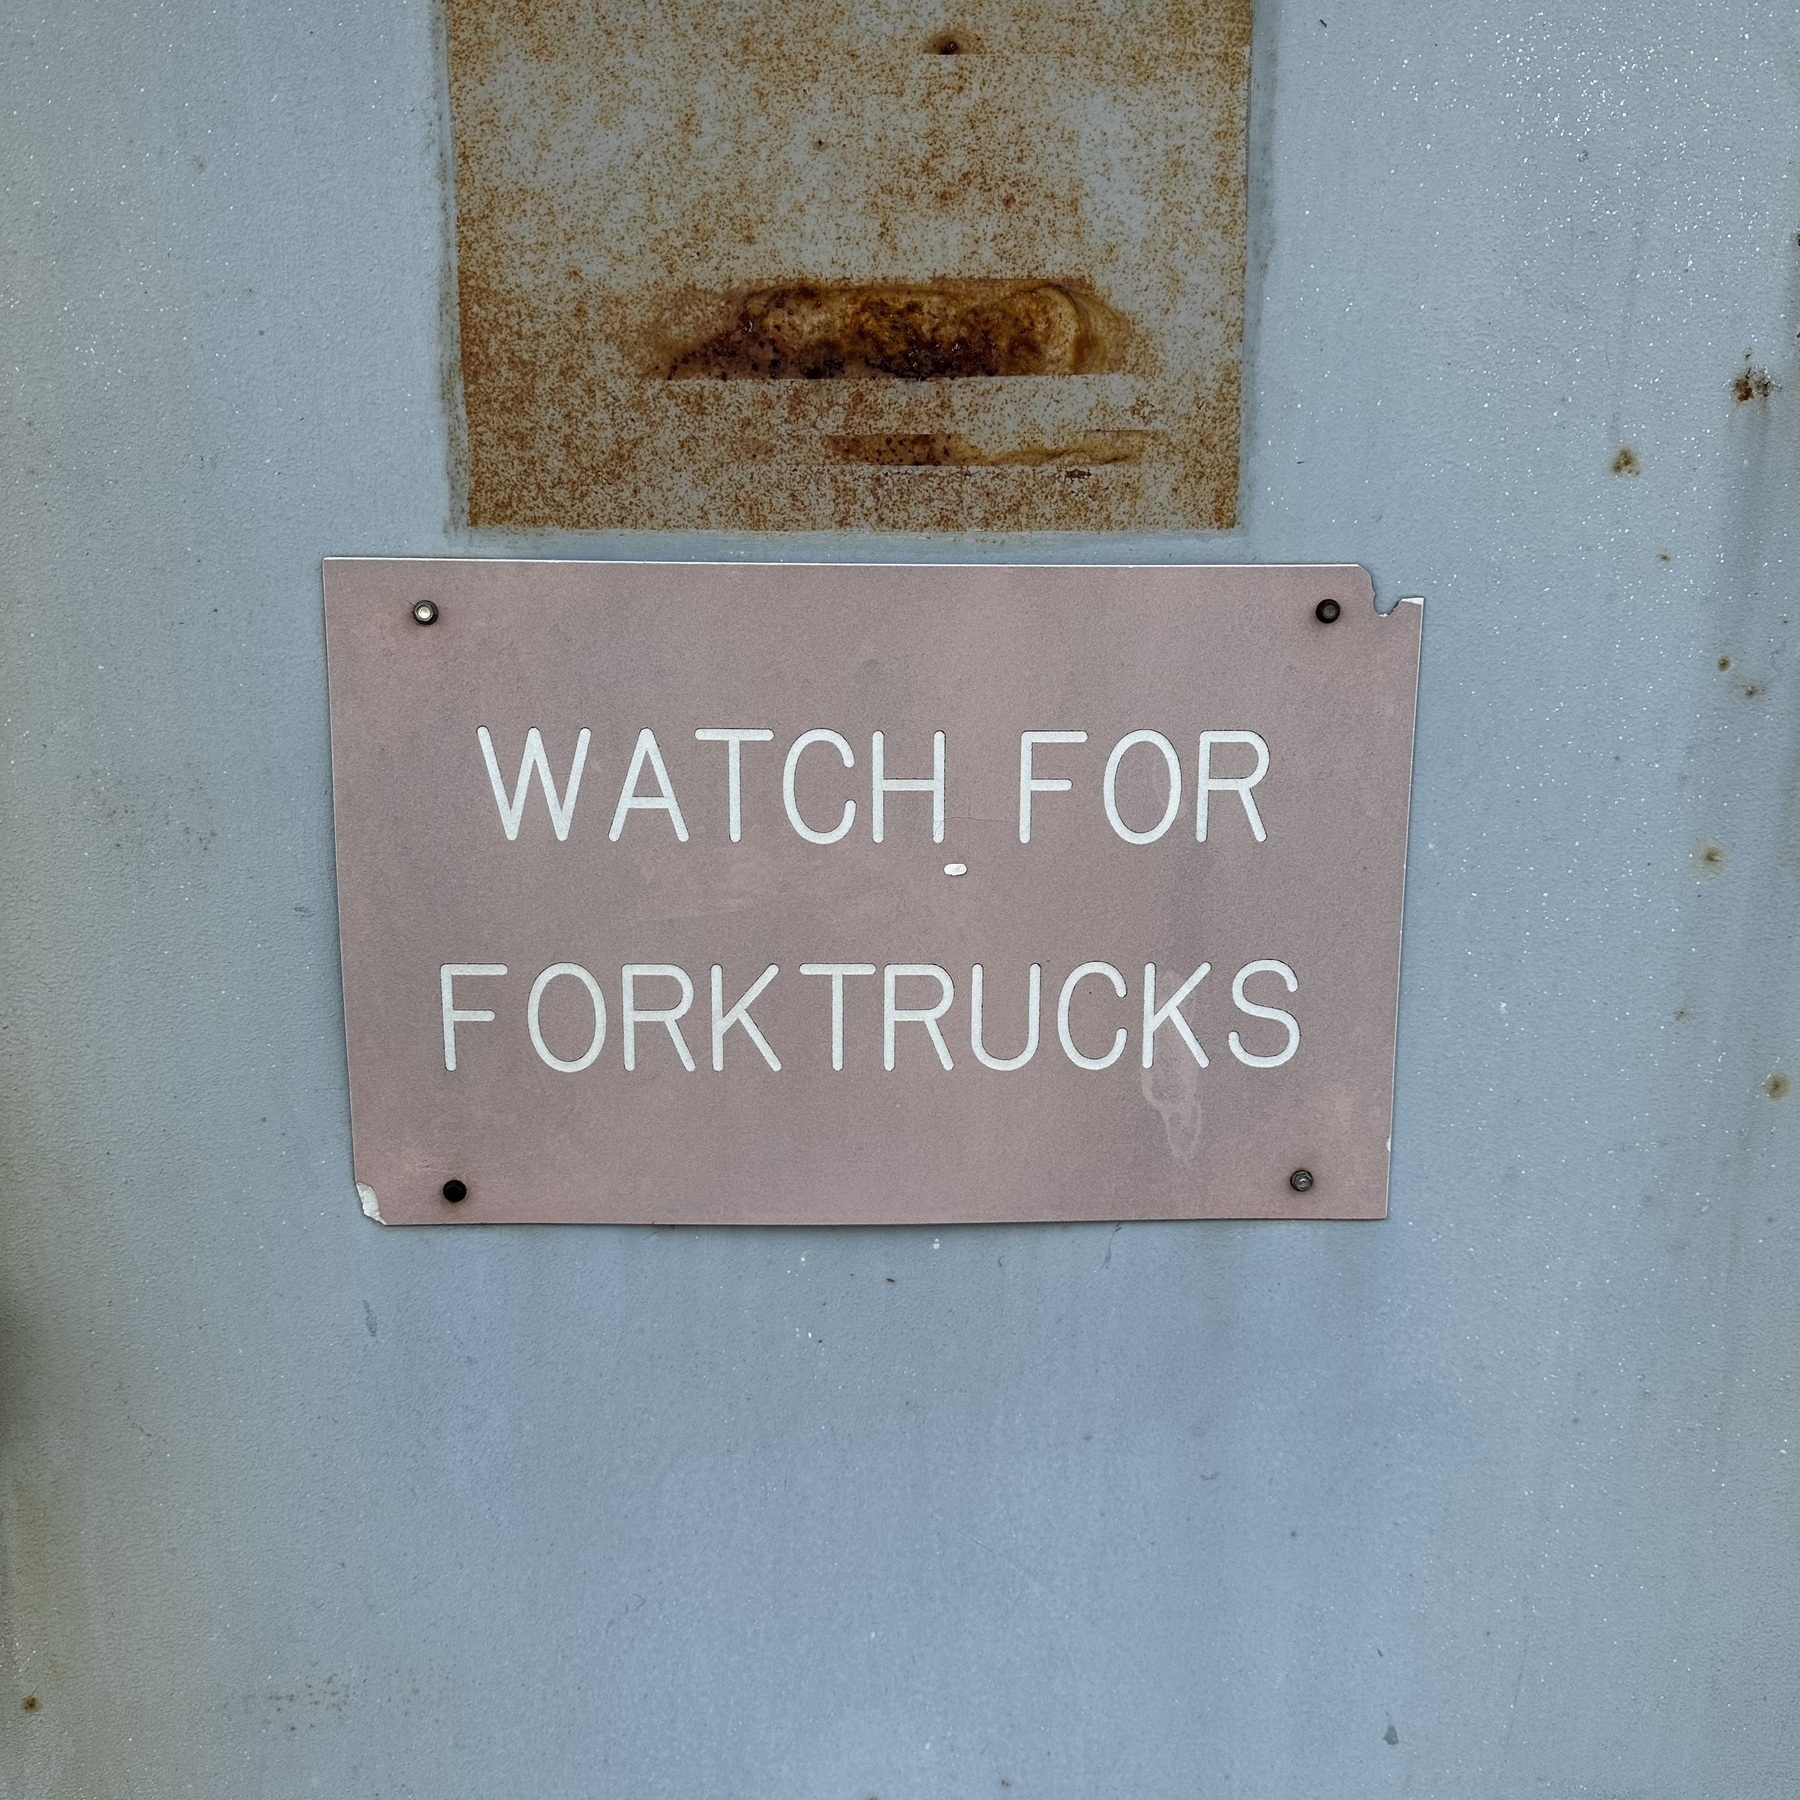 Watch for fork trucks sign on a door at a manufacturing building.